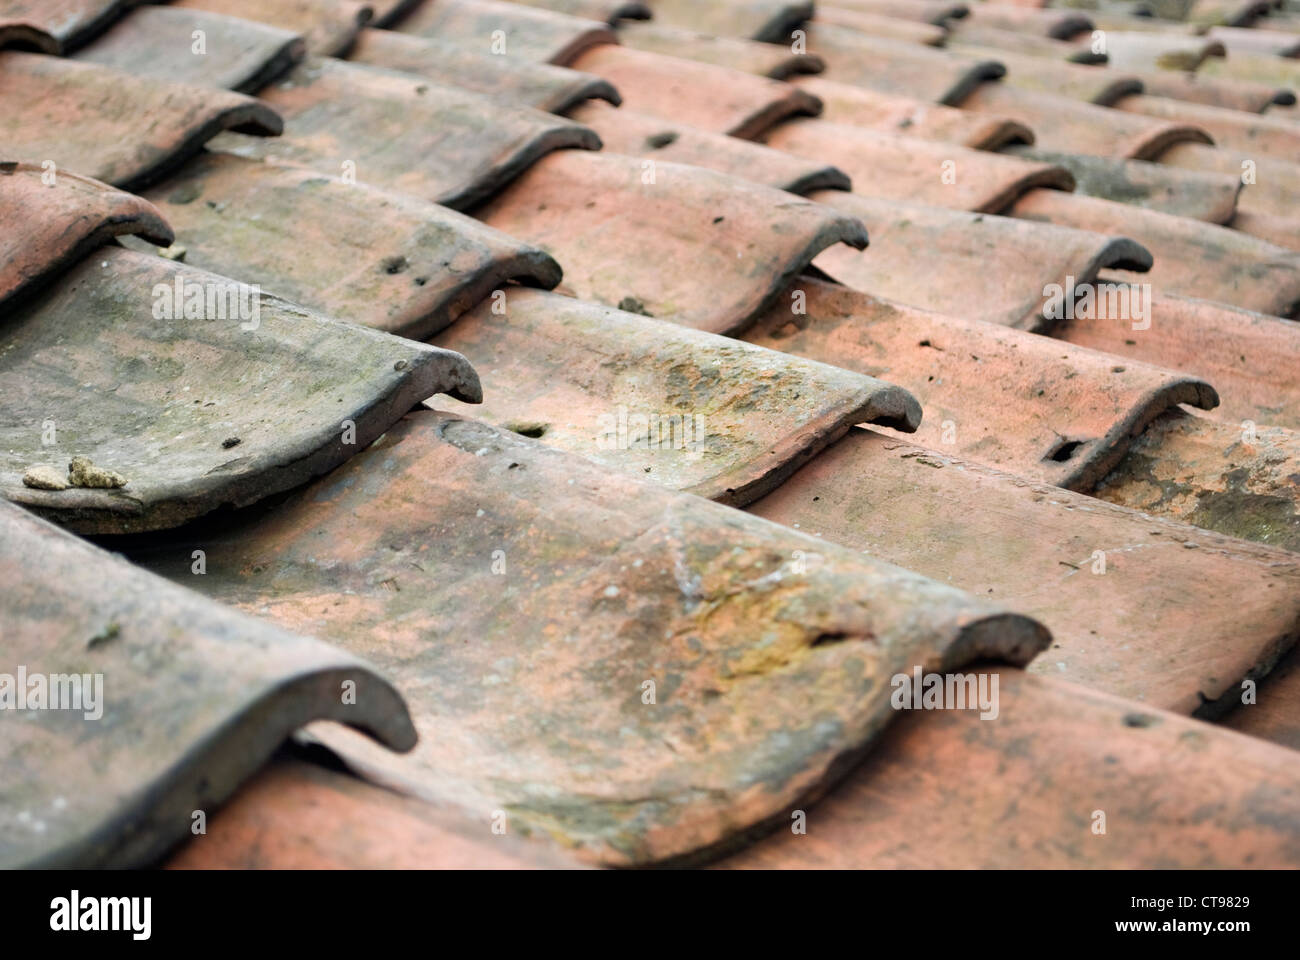 Pantile roofing tiles Stock Photo